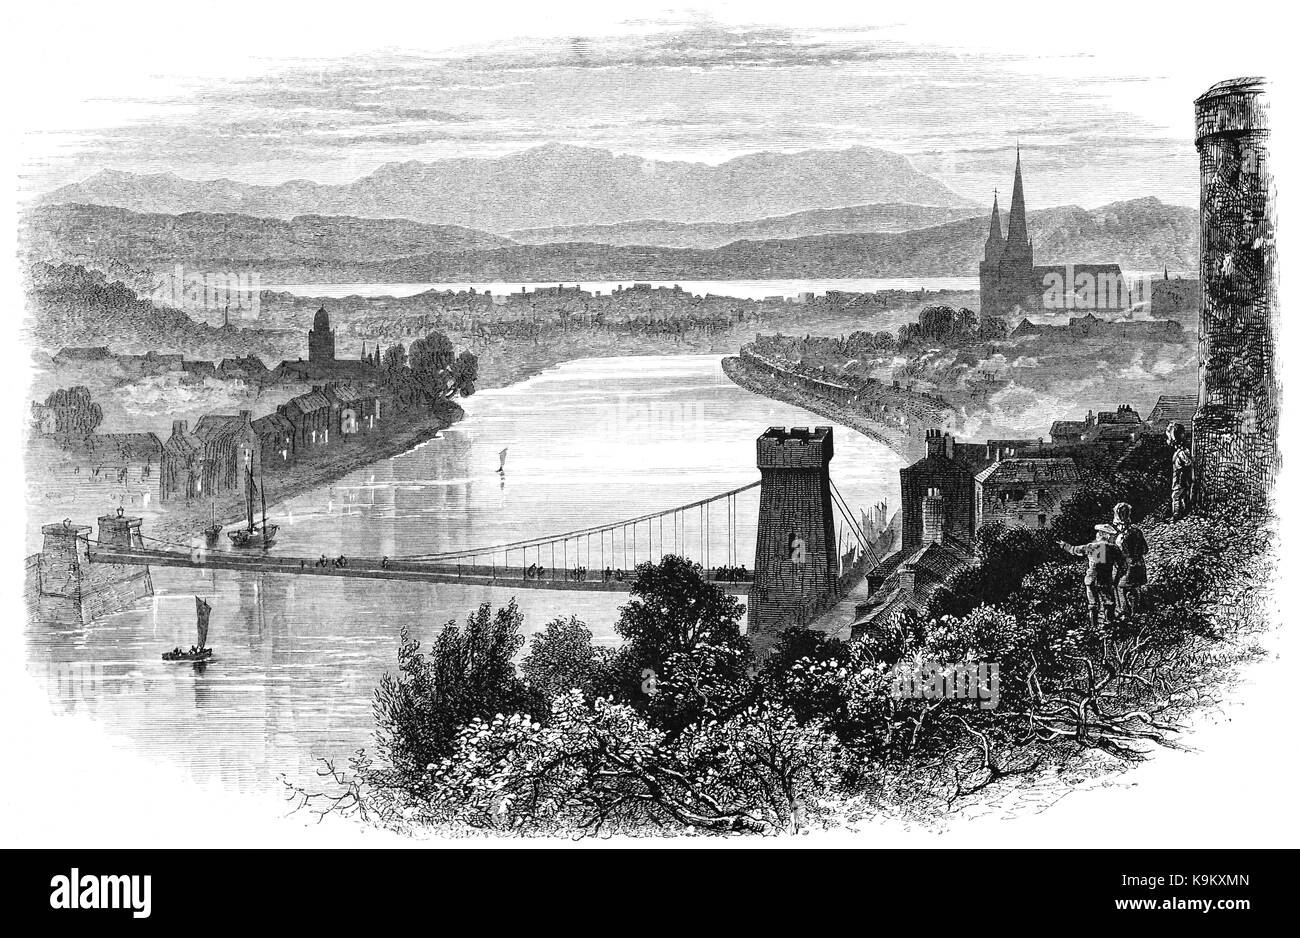 1870: Inverness is the largest city Scotland’s northeast coast, where the River Ness meets the Moray Firth. Its Old Town features 19th-century Inverness Cathedral, the mostly 18th-century Old High Church and an indoor Victorian Market selling food, clothing and crafts. Inverness-shire, Scotland Stock Photo